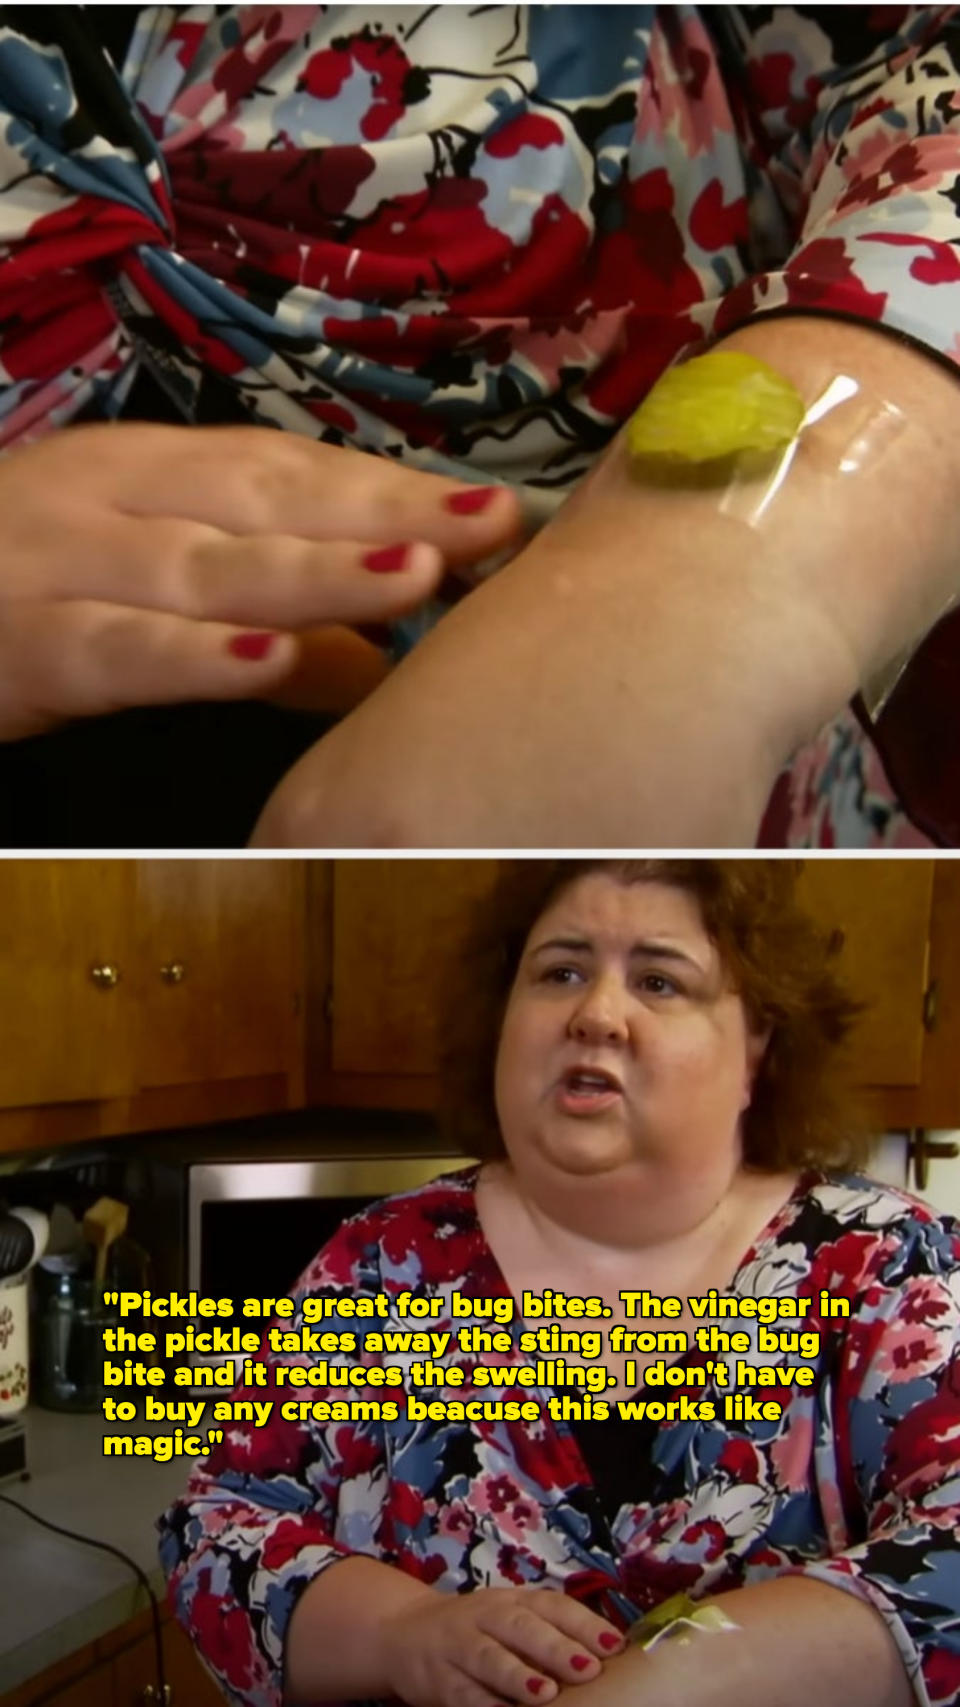 Woman receiving an injection on her arm; same woman in an interview wearing a floral top